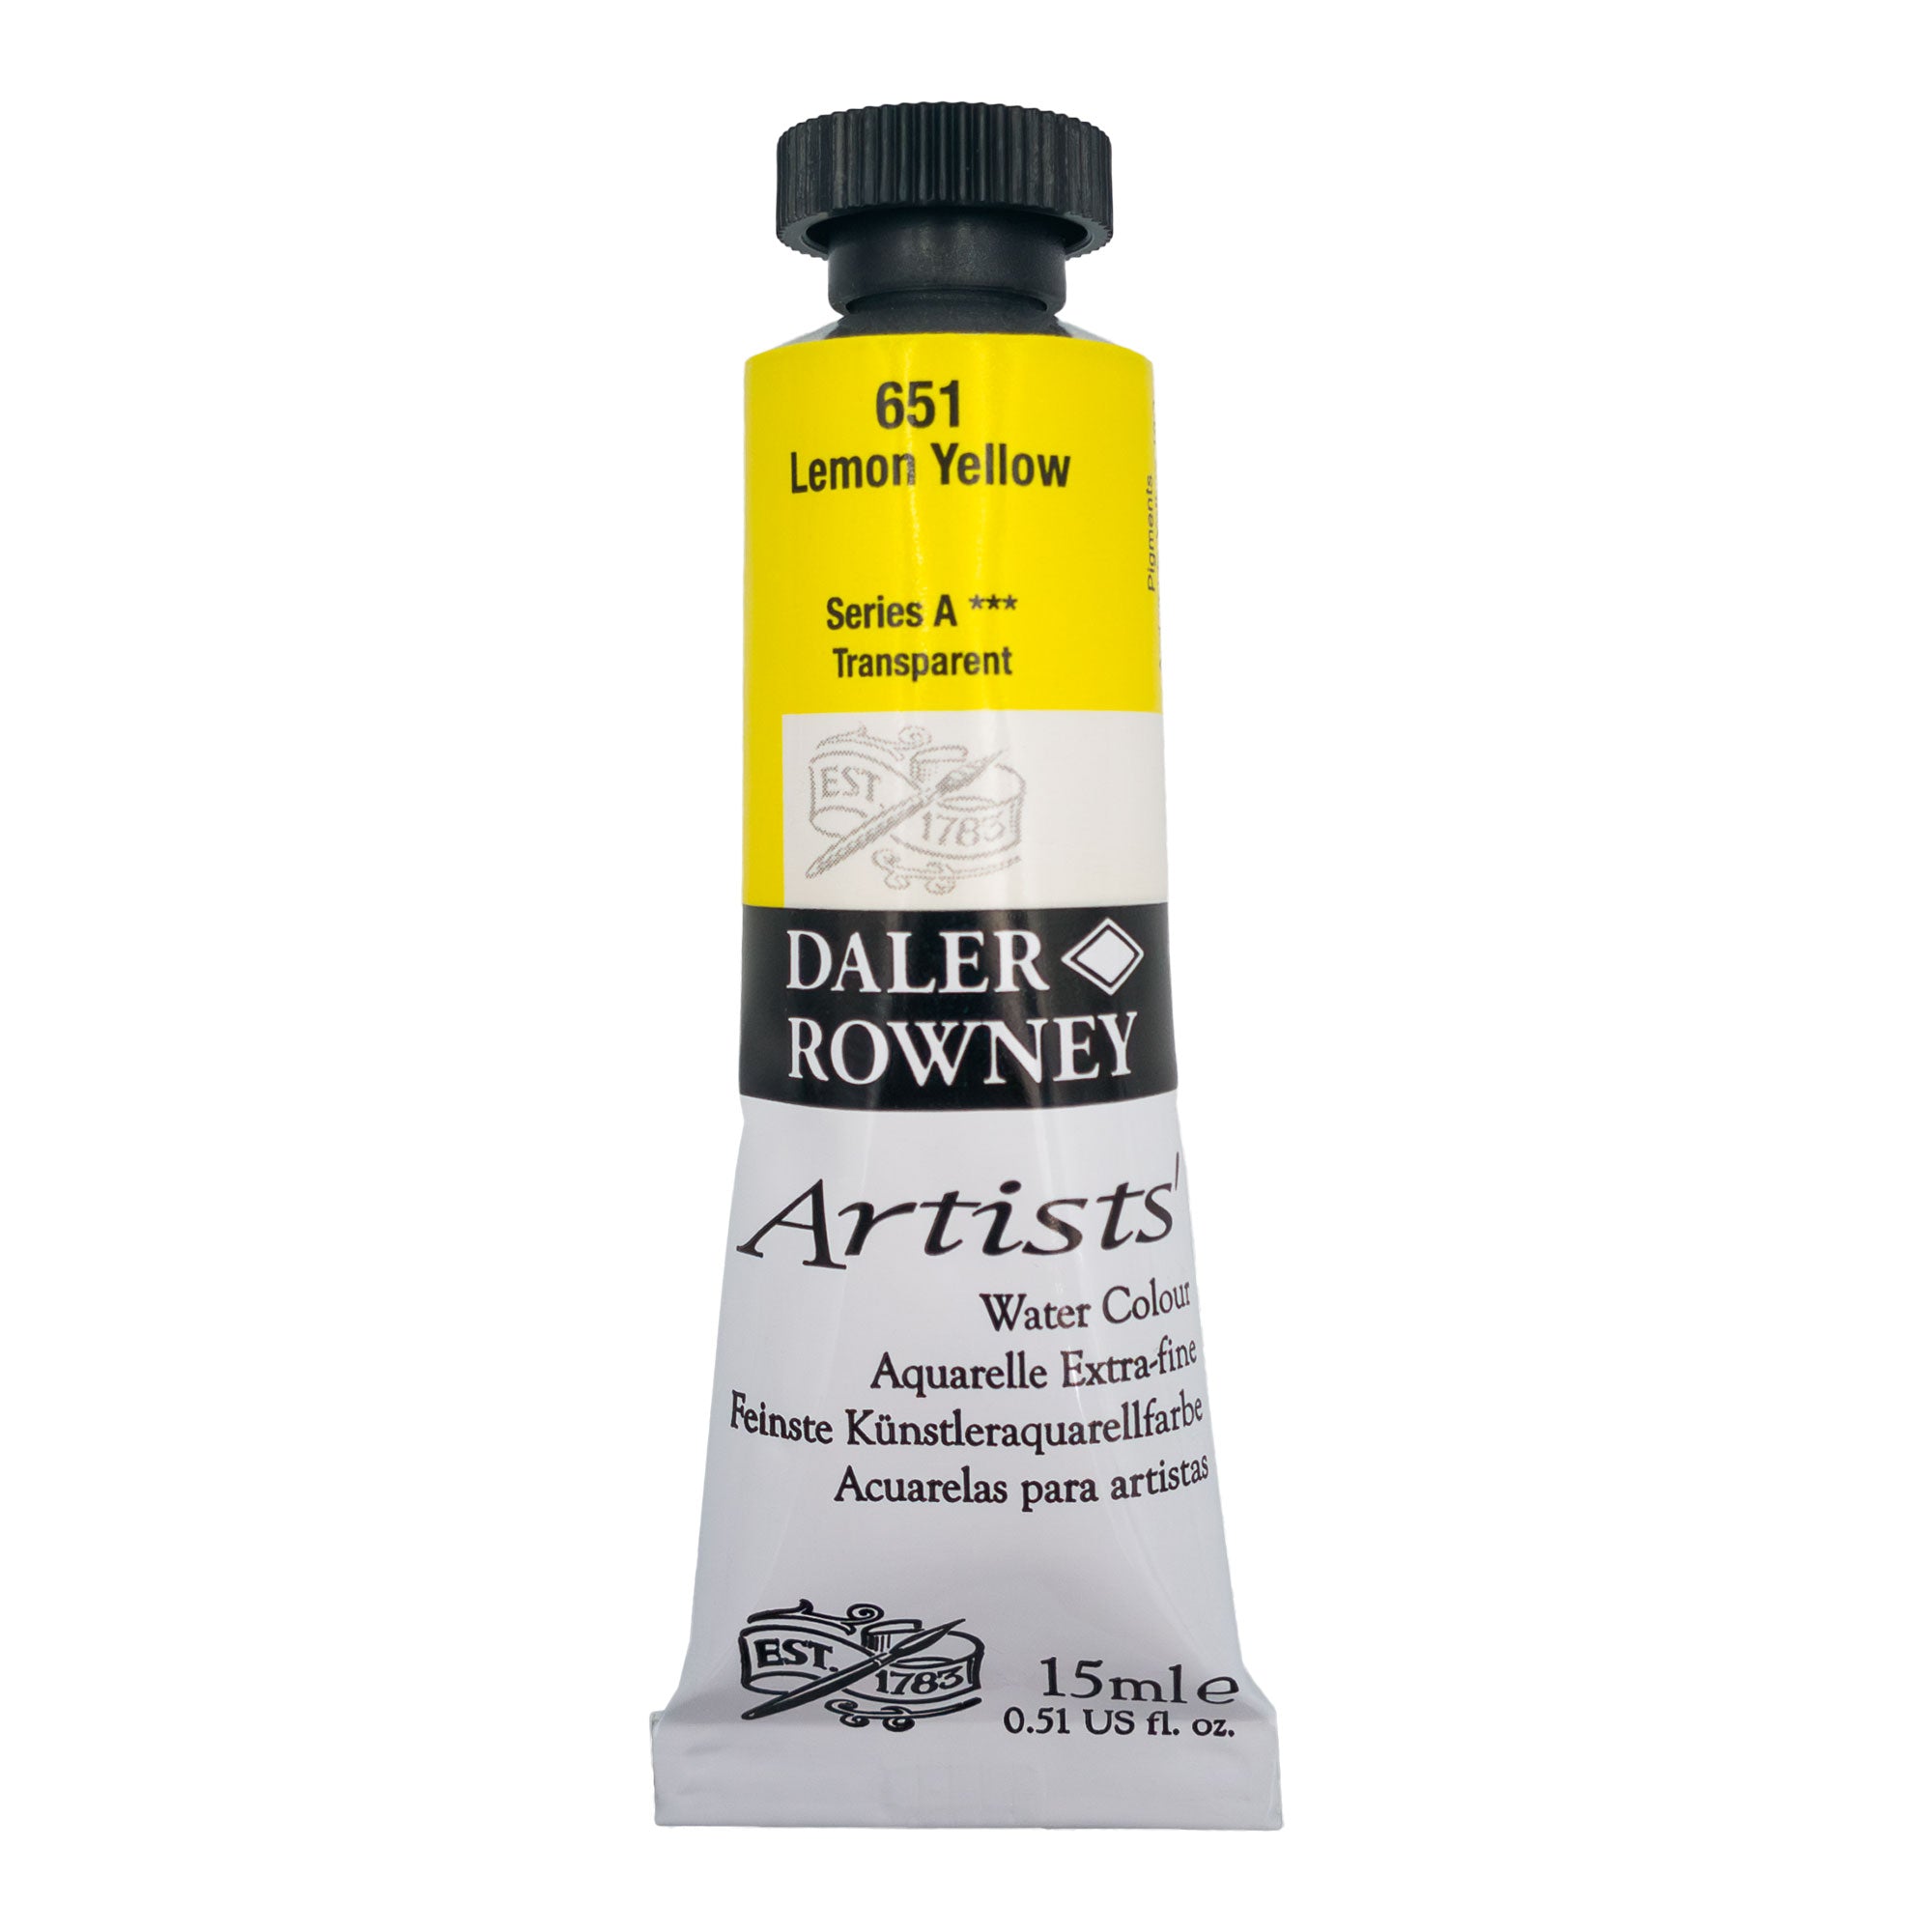 Daler-Rowney Professional Artists Watercolour 15ml Tubes - Series A & B